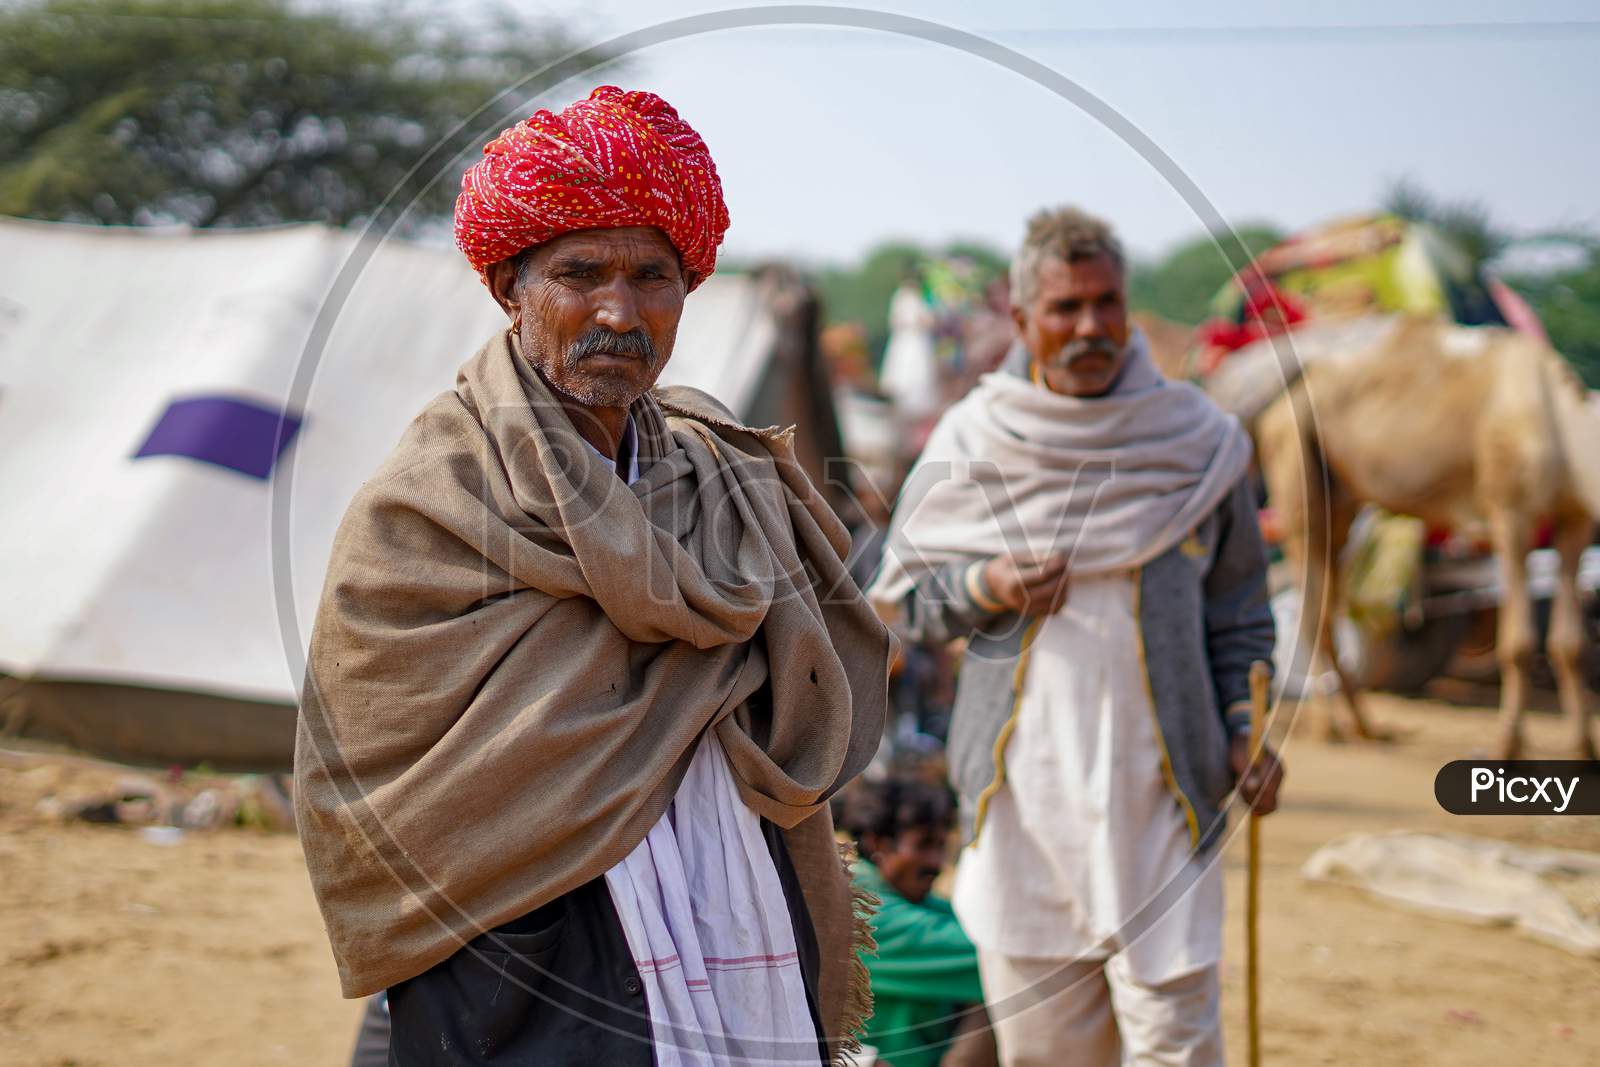 Pushkar, Rajasthan / India- June 5 2020 :A Portrait Of An Old Man With Red Turban In Pushkar During Camel Fair.